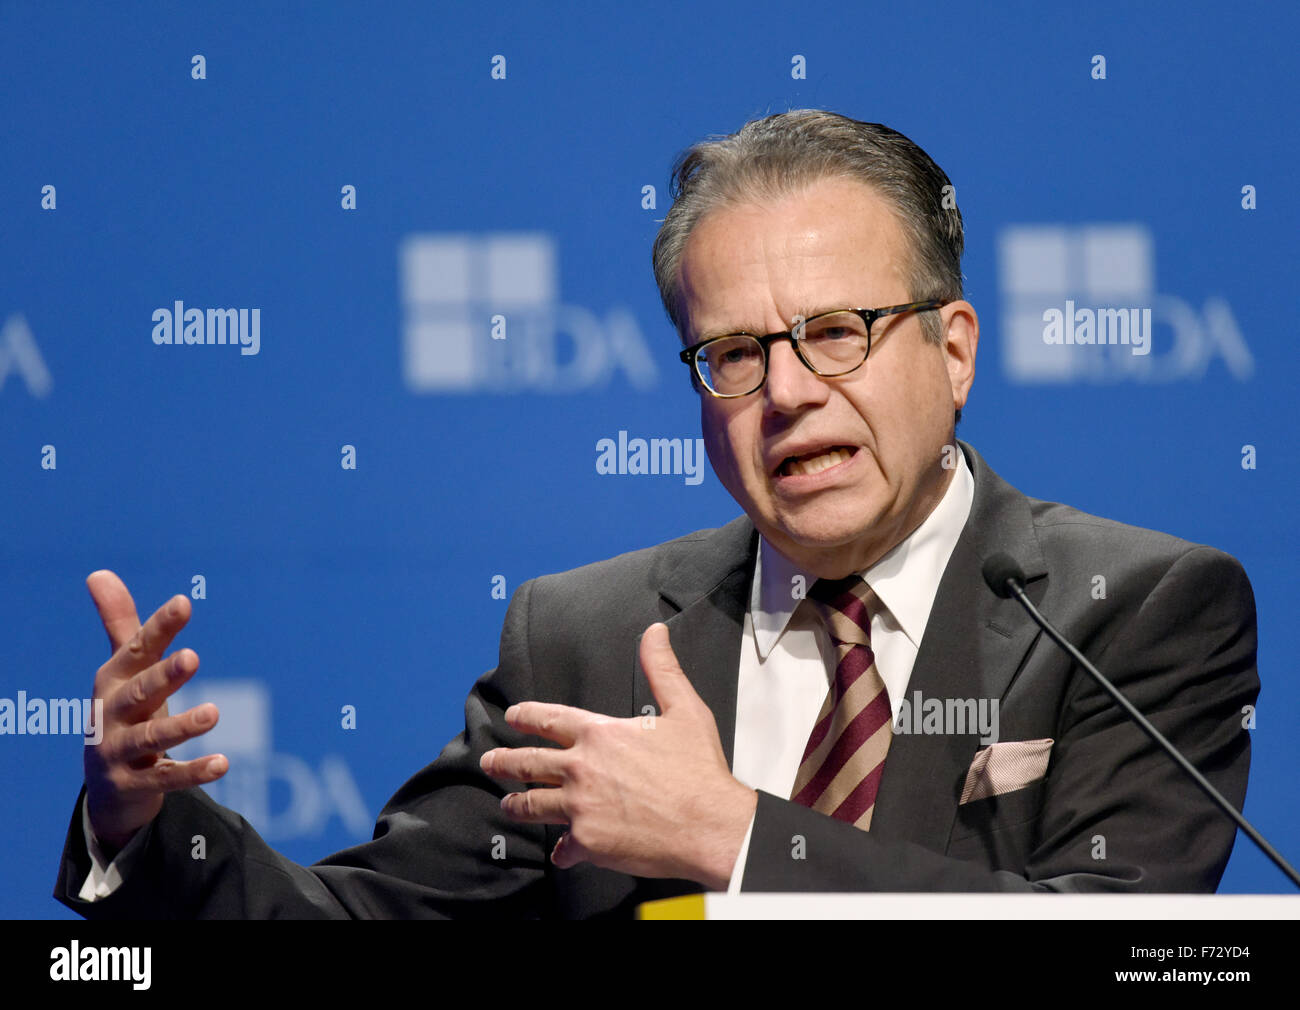 Berlin, Germany. 24th Nov, 2015. Frank-Juergen Weise, chairman of the German Federal Employment Agency and head of the Federal Office for Migration and Refugees, speaking to guests at the German Employers' Conference in Berlin, Germany, 24 November 2015. PHOTO: RAINER JENSEN/DPA/Alamy Live News Stock Photo